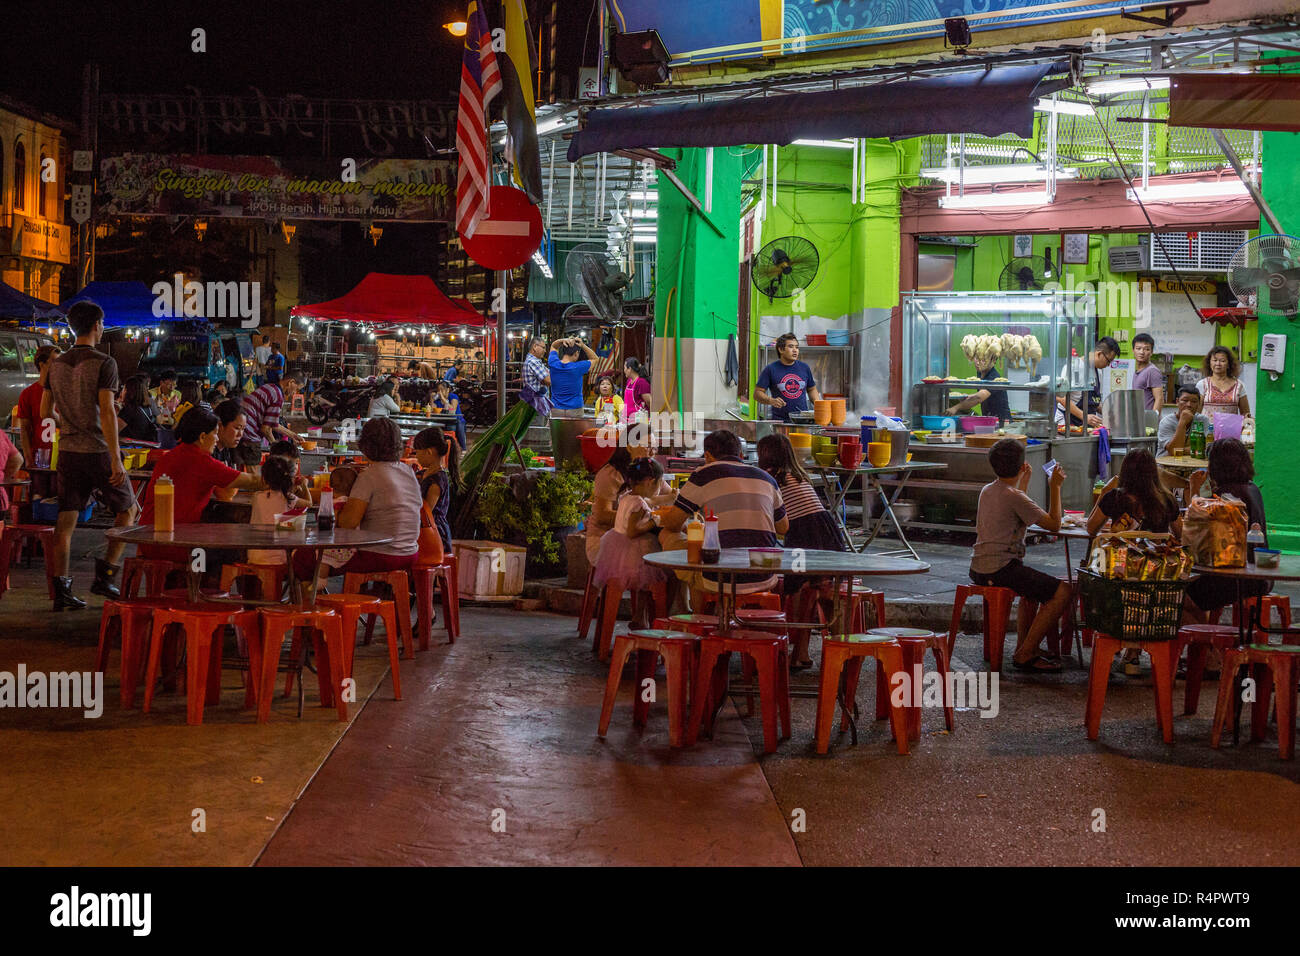 Families Dining Outdoors at Night at a Sidewalk Cafe, Ipoh, Malaysia. Stock Photo